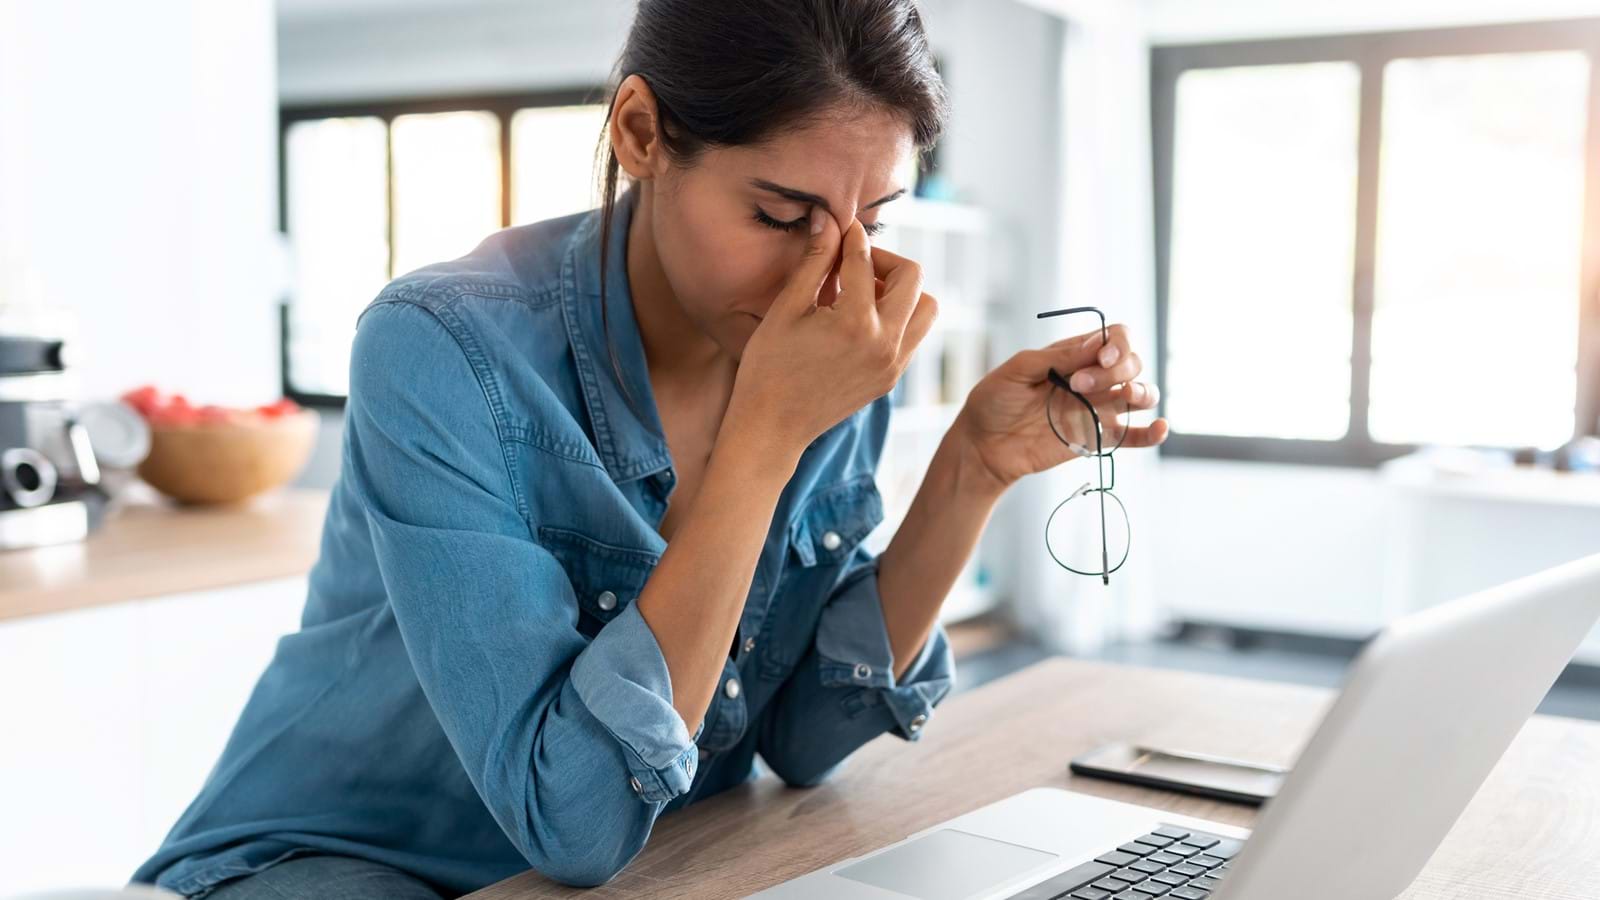 Stressed remote worker feeling the effects of bad employee experience